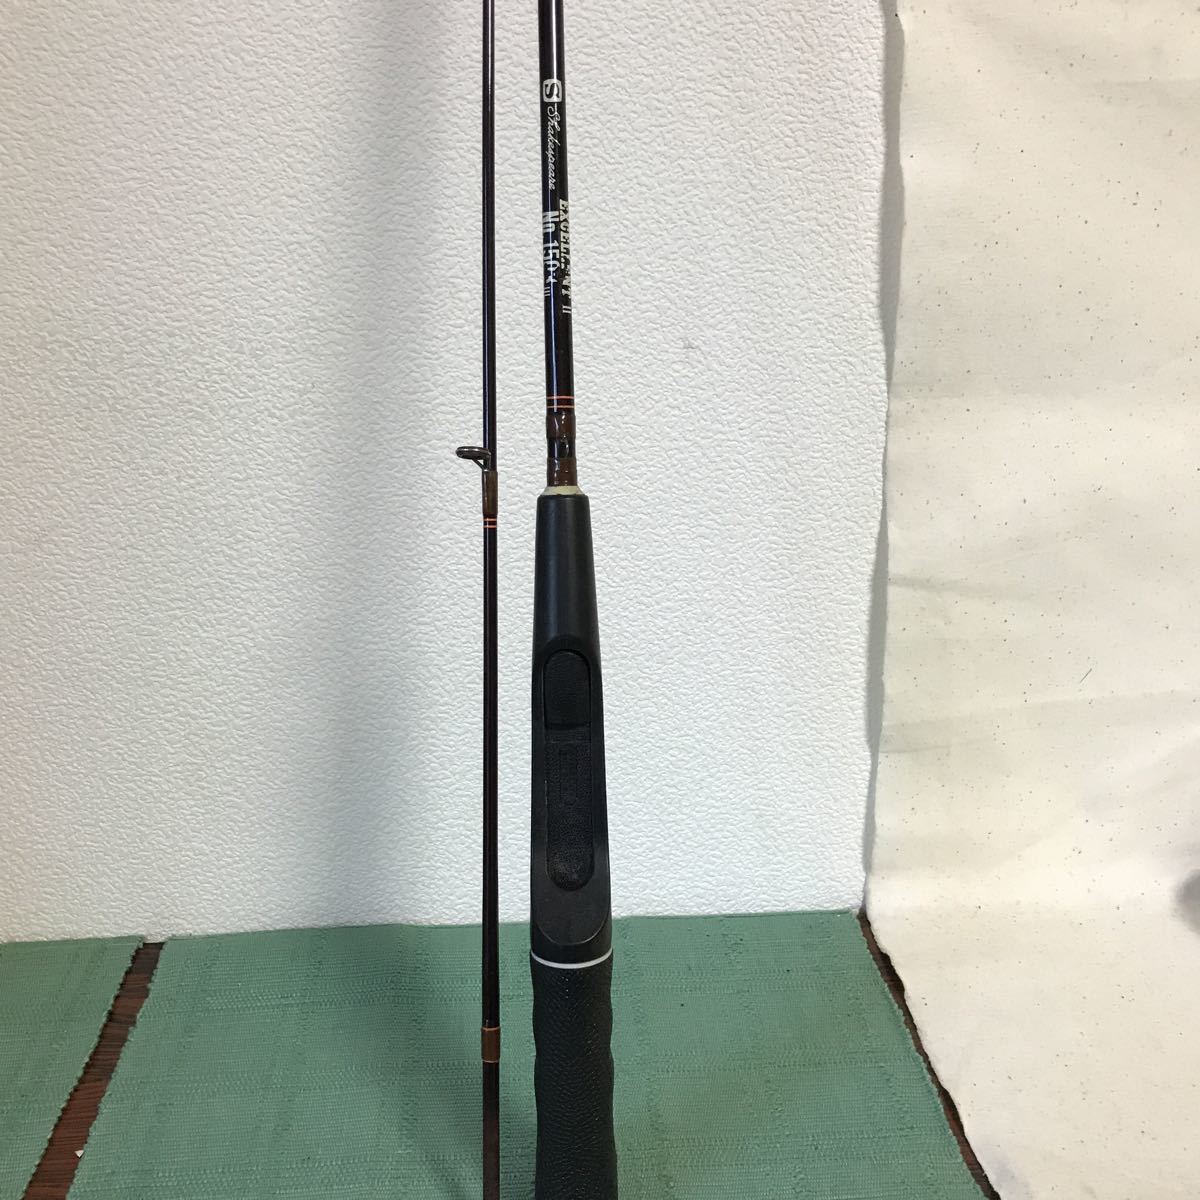 Z-218 釣竿　Shakespeare EXCELLENT Ⅱ No.1503 UL LENGTH 1.65m/LURE WT 27g USA製　中古品